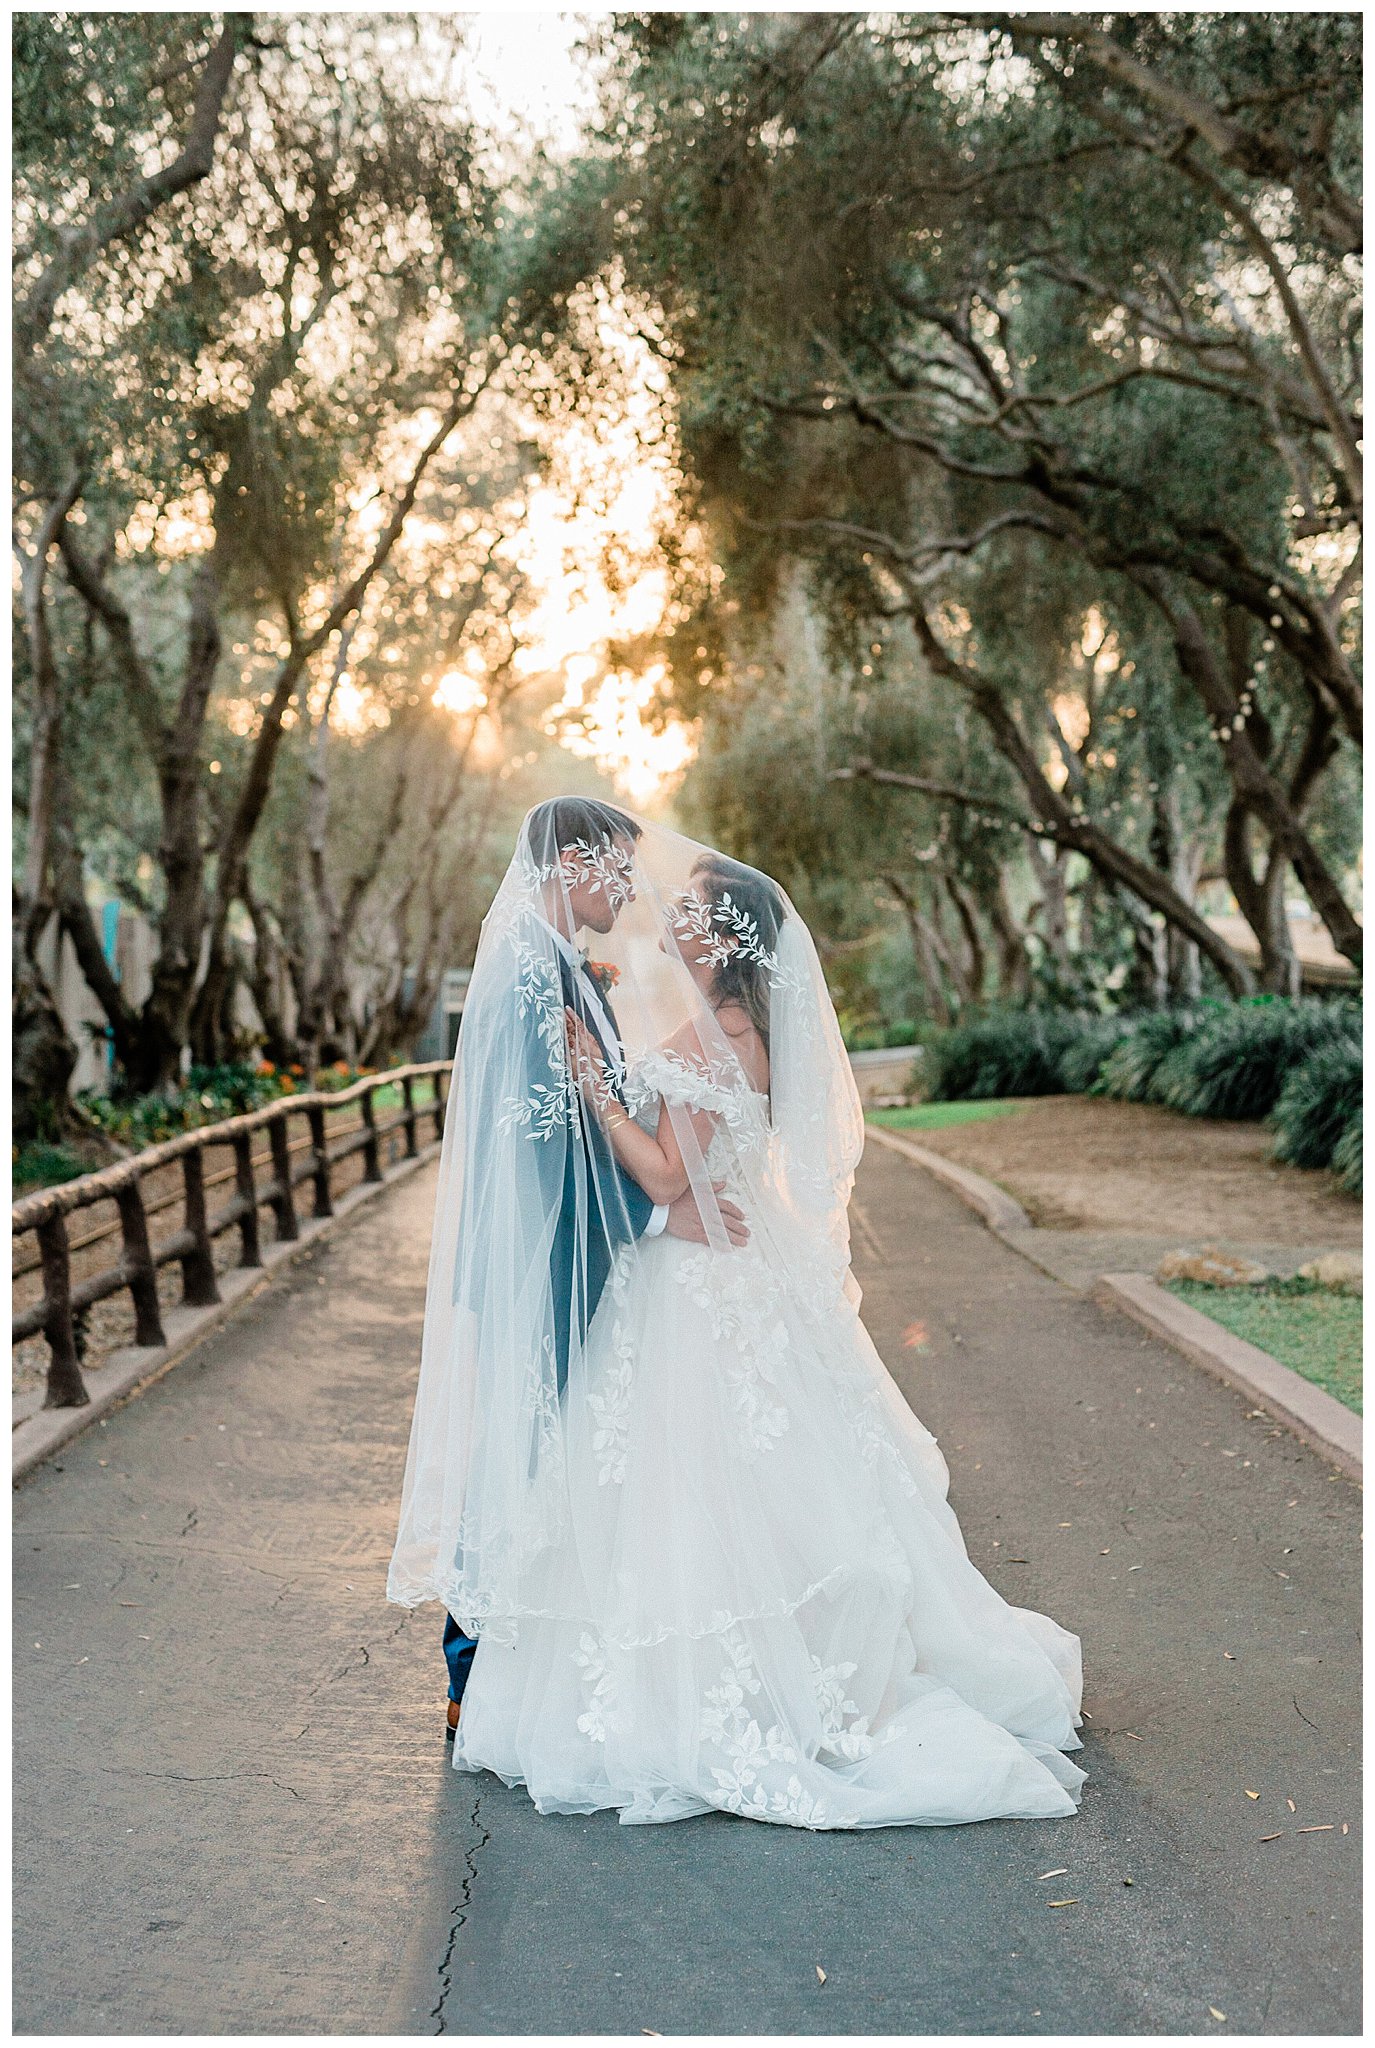 A bride and groom stand under the wedding veil with golden warm light, flowing through the trees during their wedding at the Santa Barbara zoo, a unique California wedding venue.